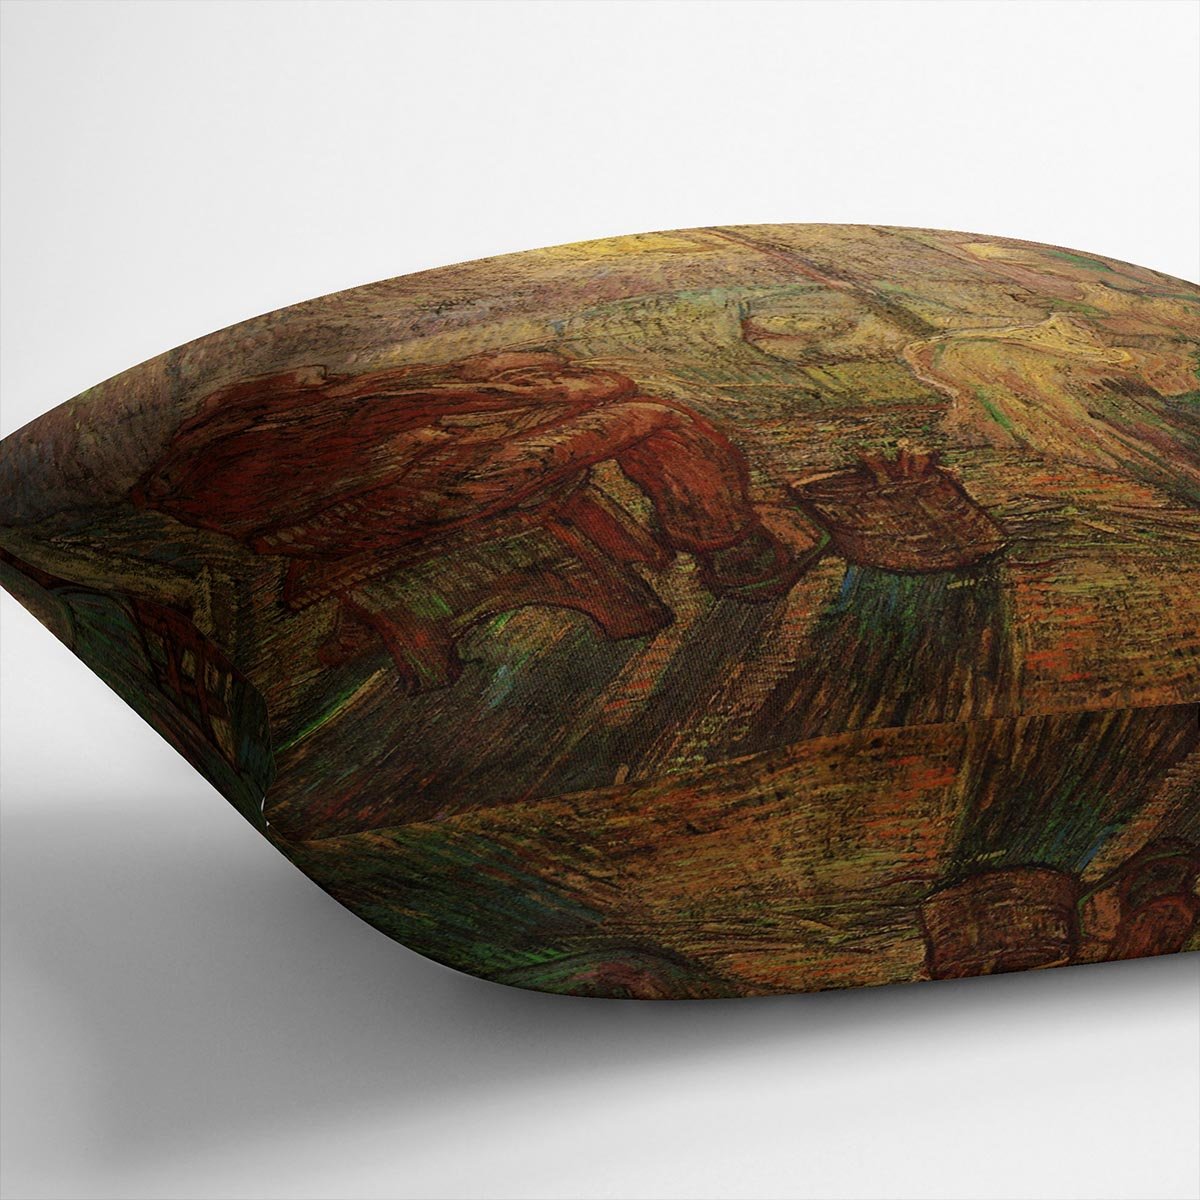 Evening The Watch after Millet by Van Gogh Throw Pillow